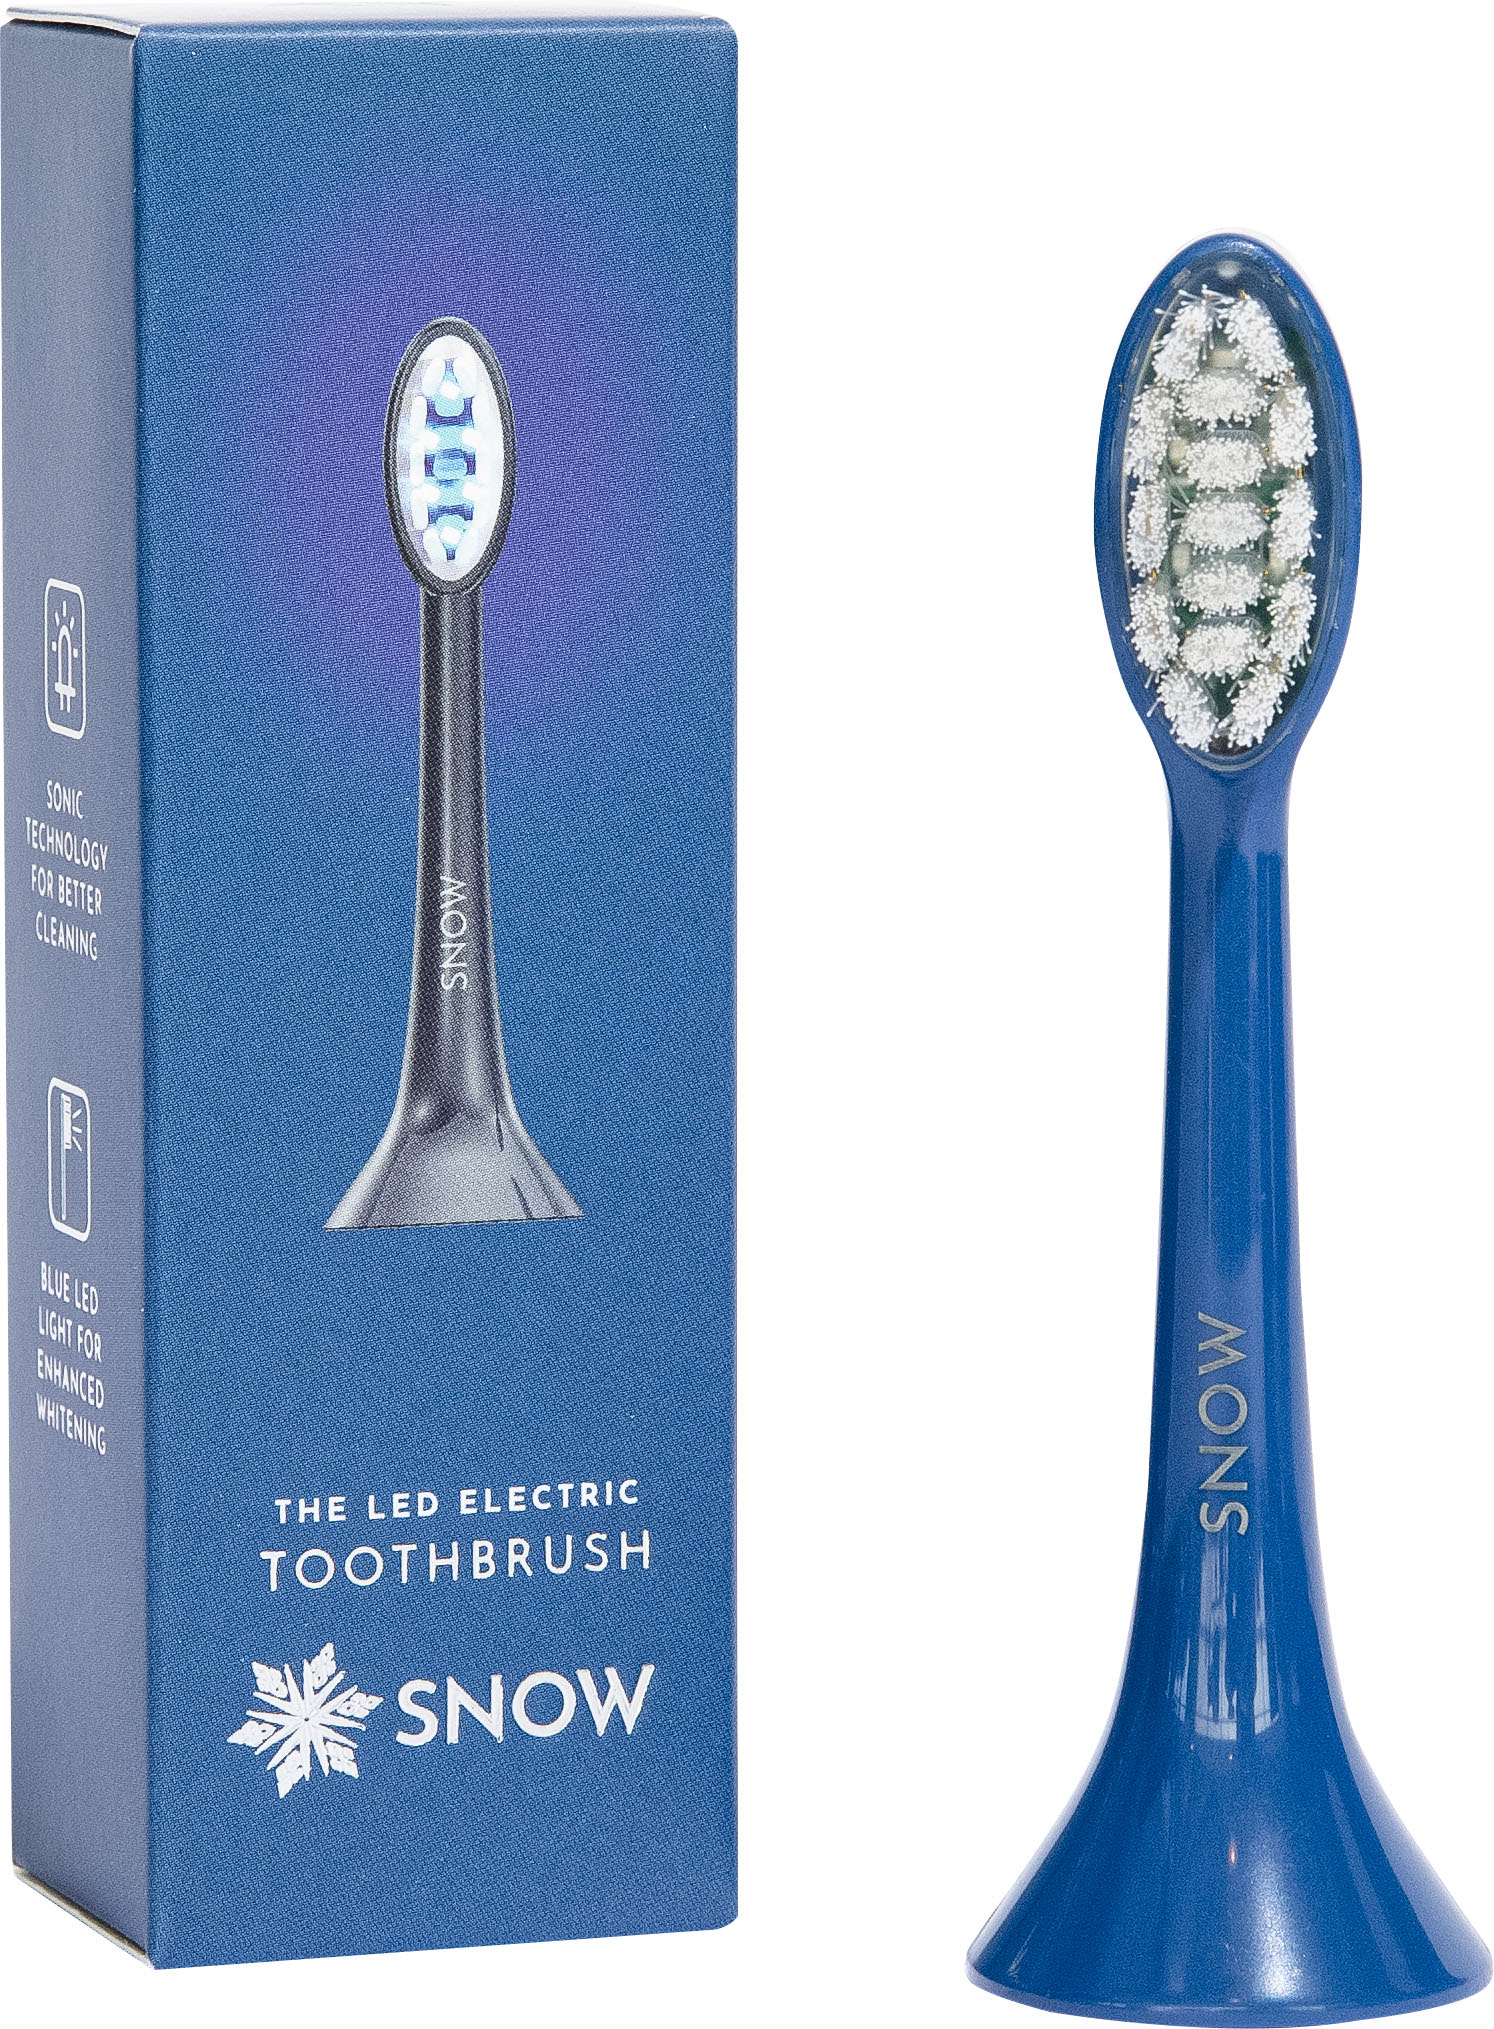 Snow - LED Toothbrush Replacement Head - Blue